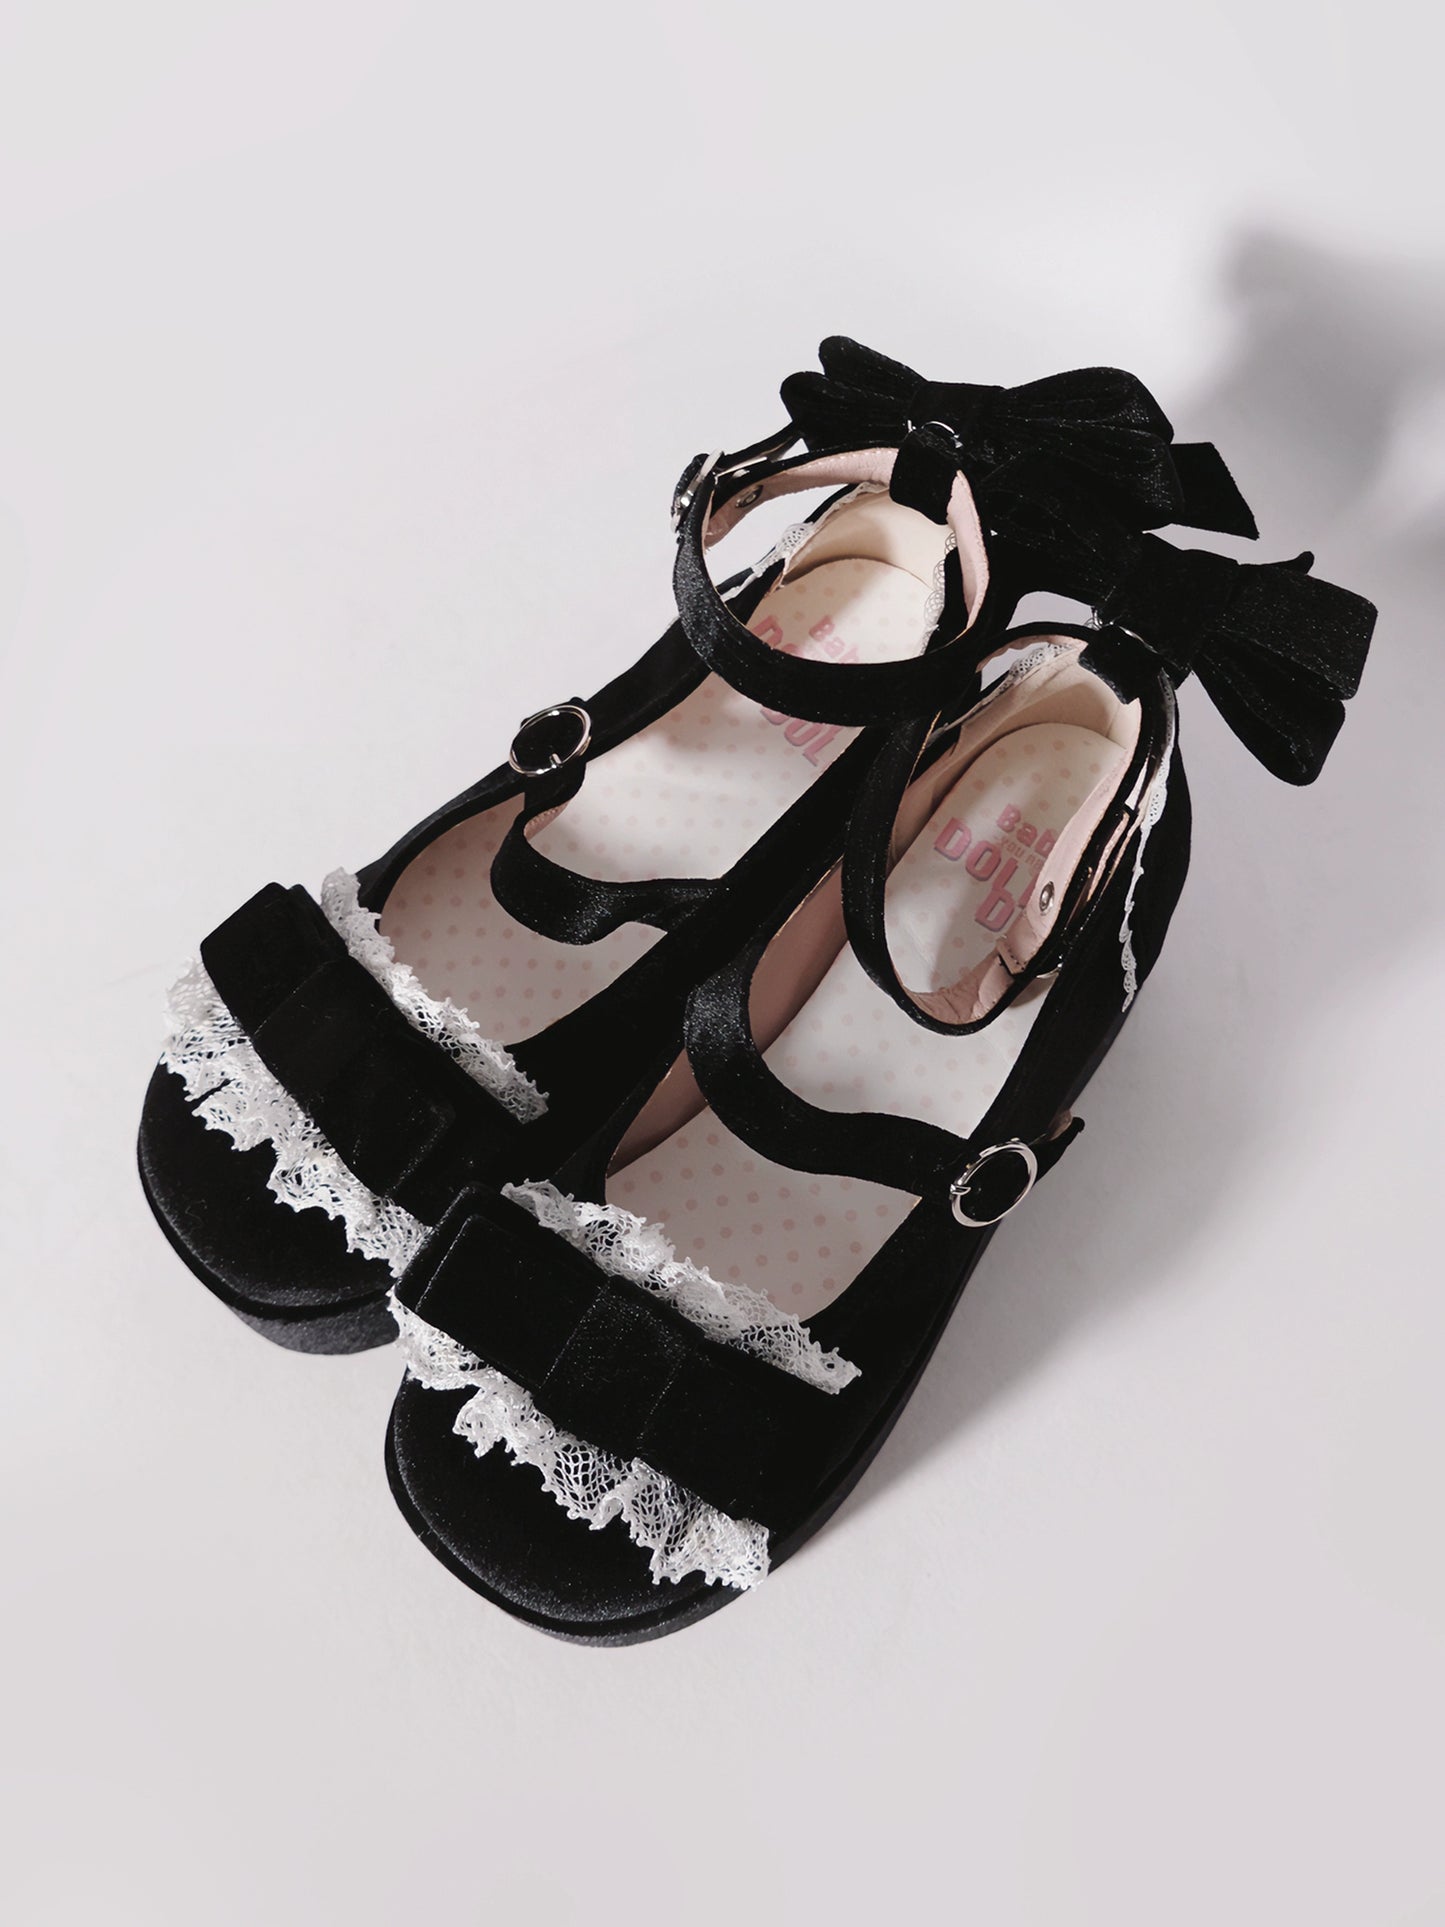 Lolita Shoes Round-Toe Platform Shoes With Velvet Bow 37132:552686